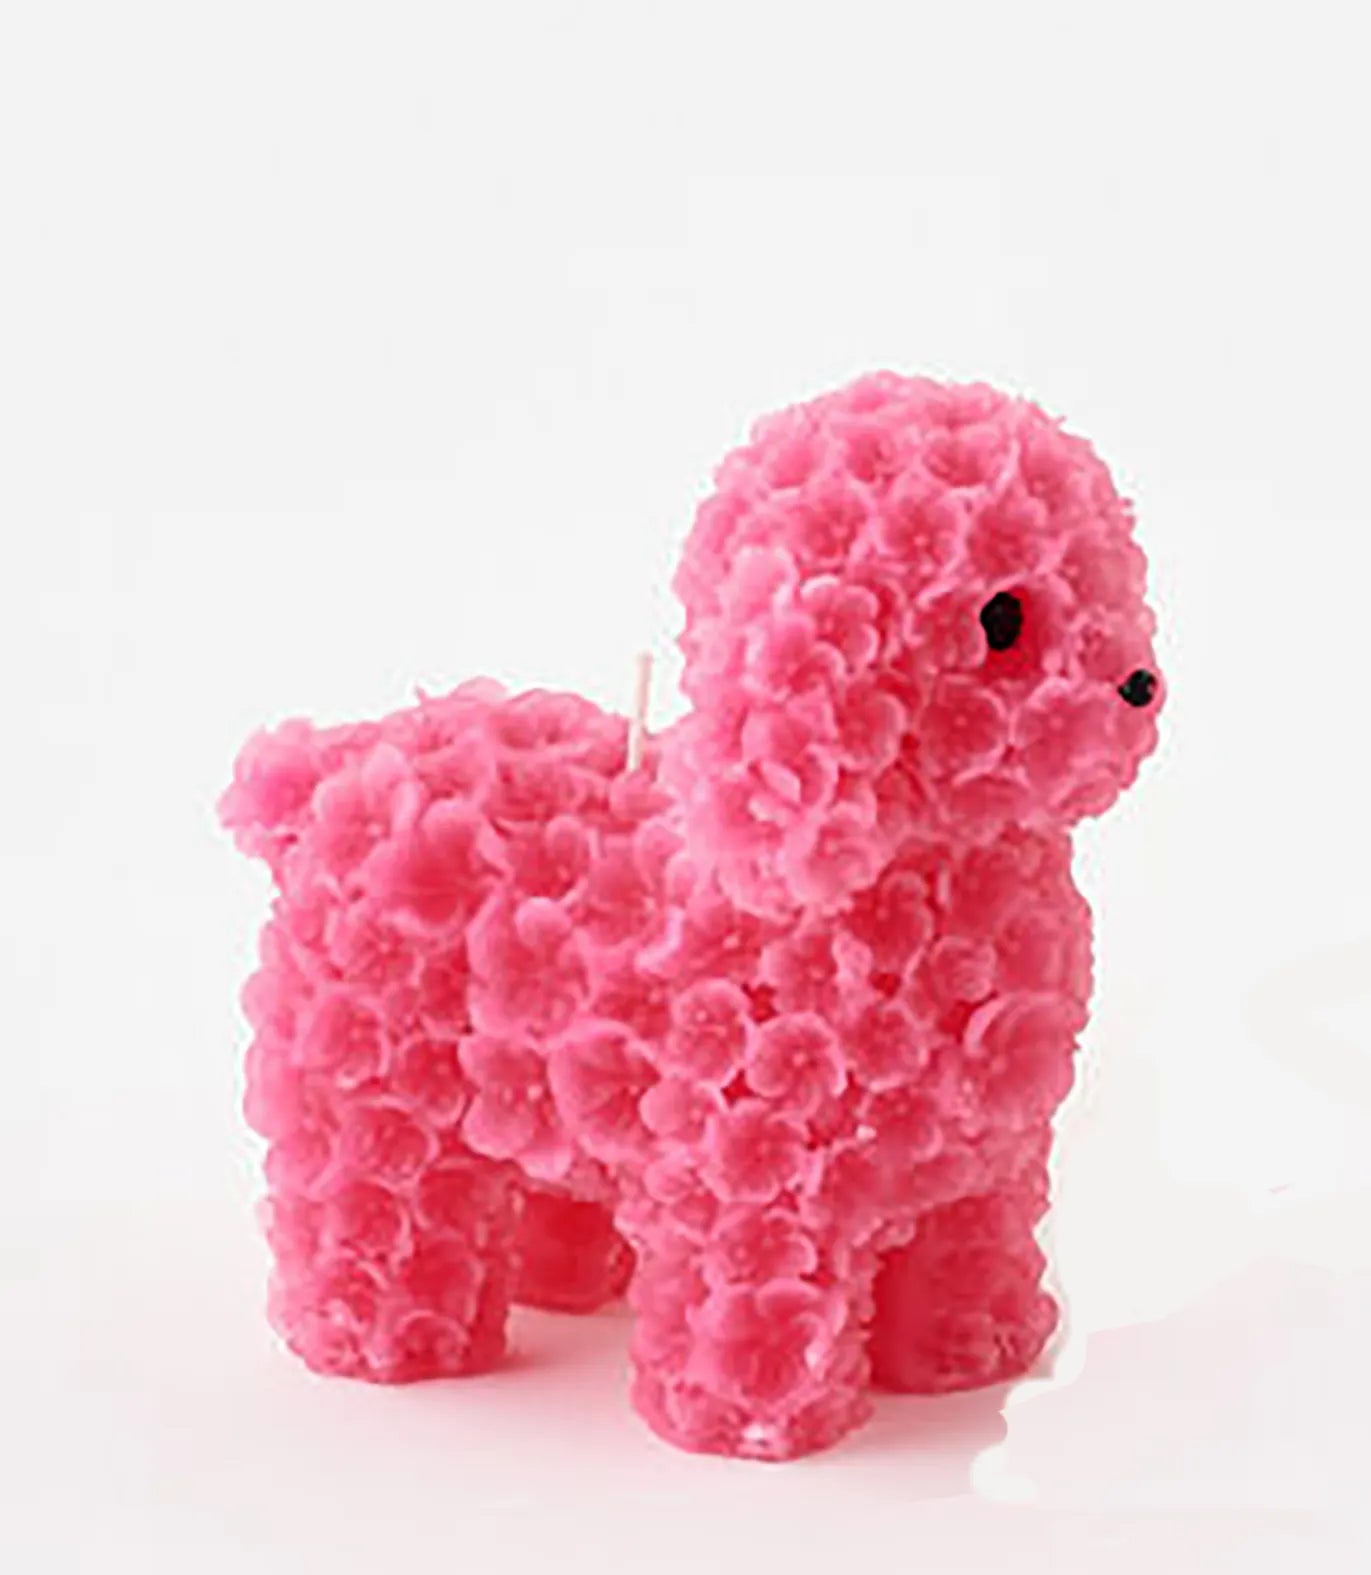 Poodle Candle